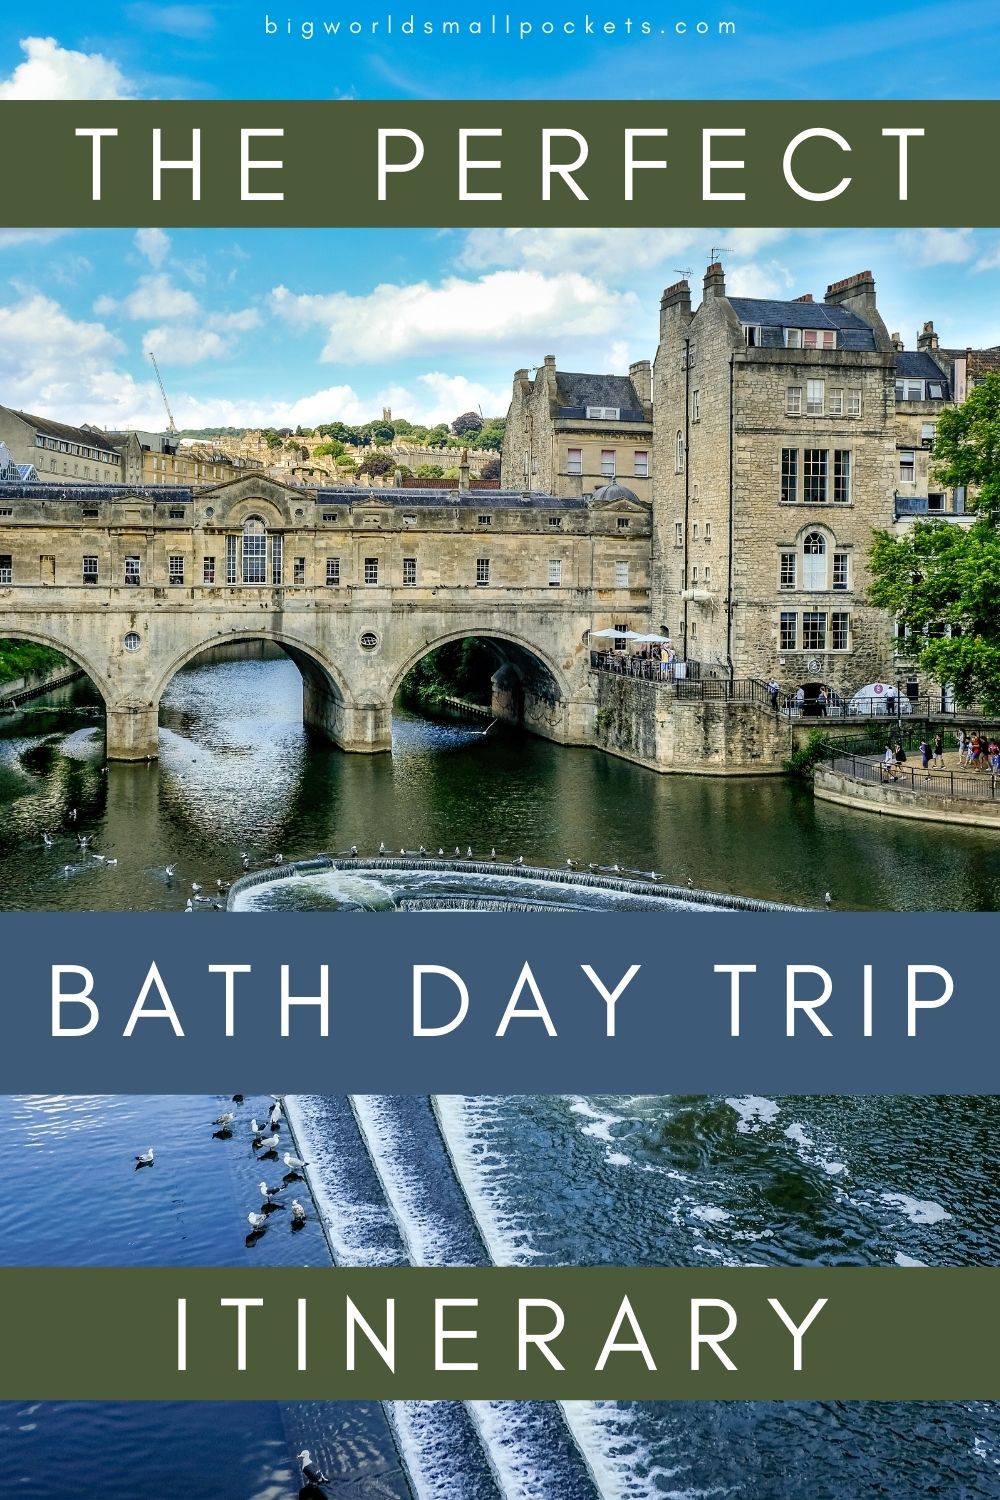 The Perfect Day Trip Itinerary for Bath, England